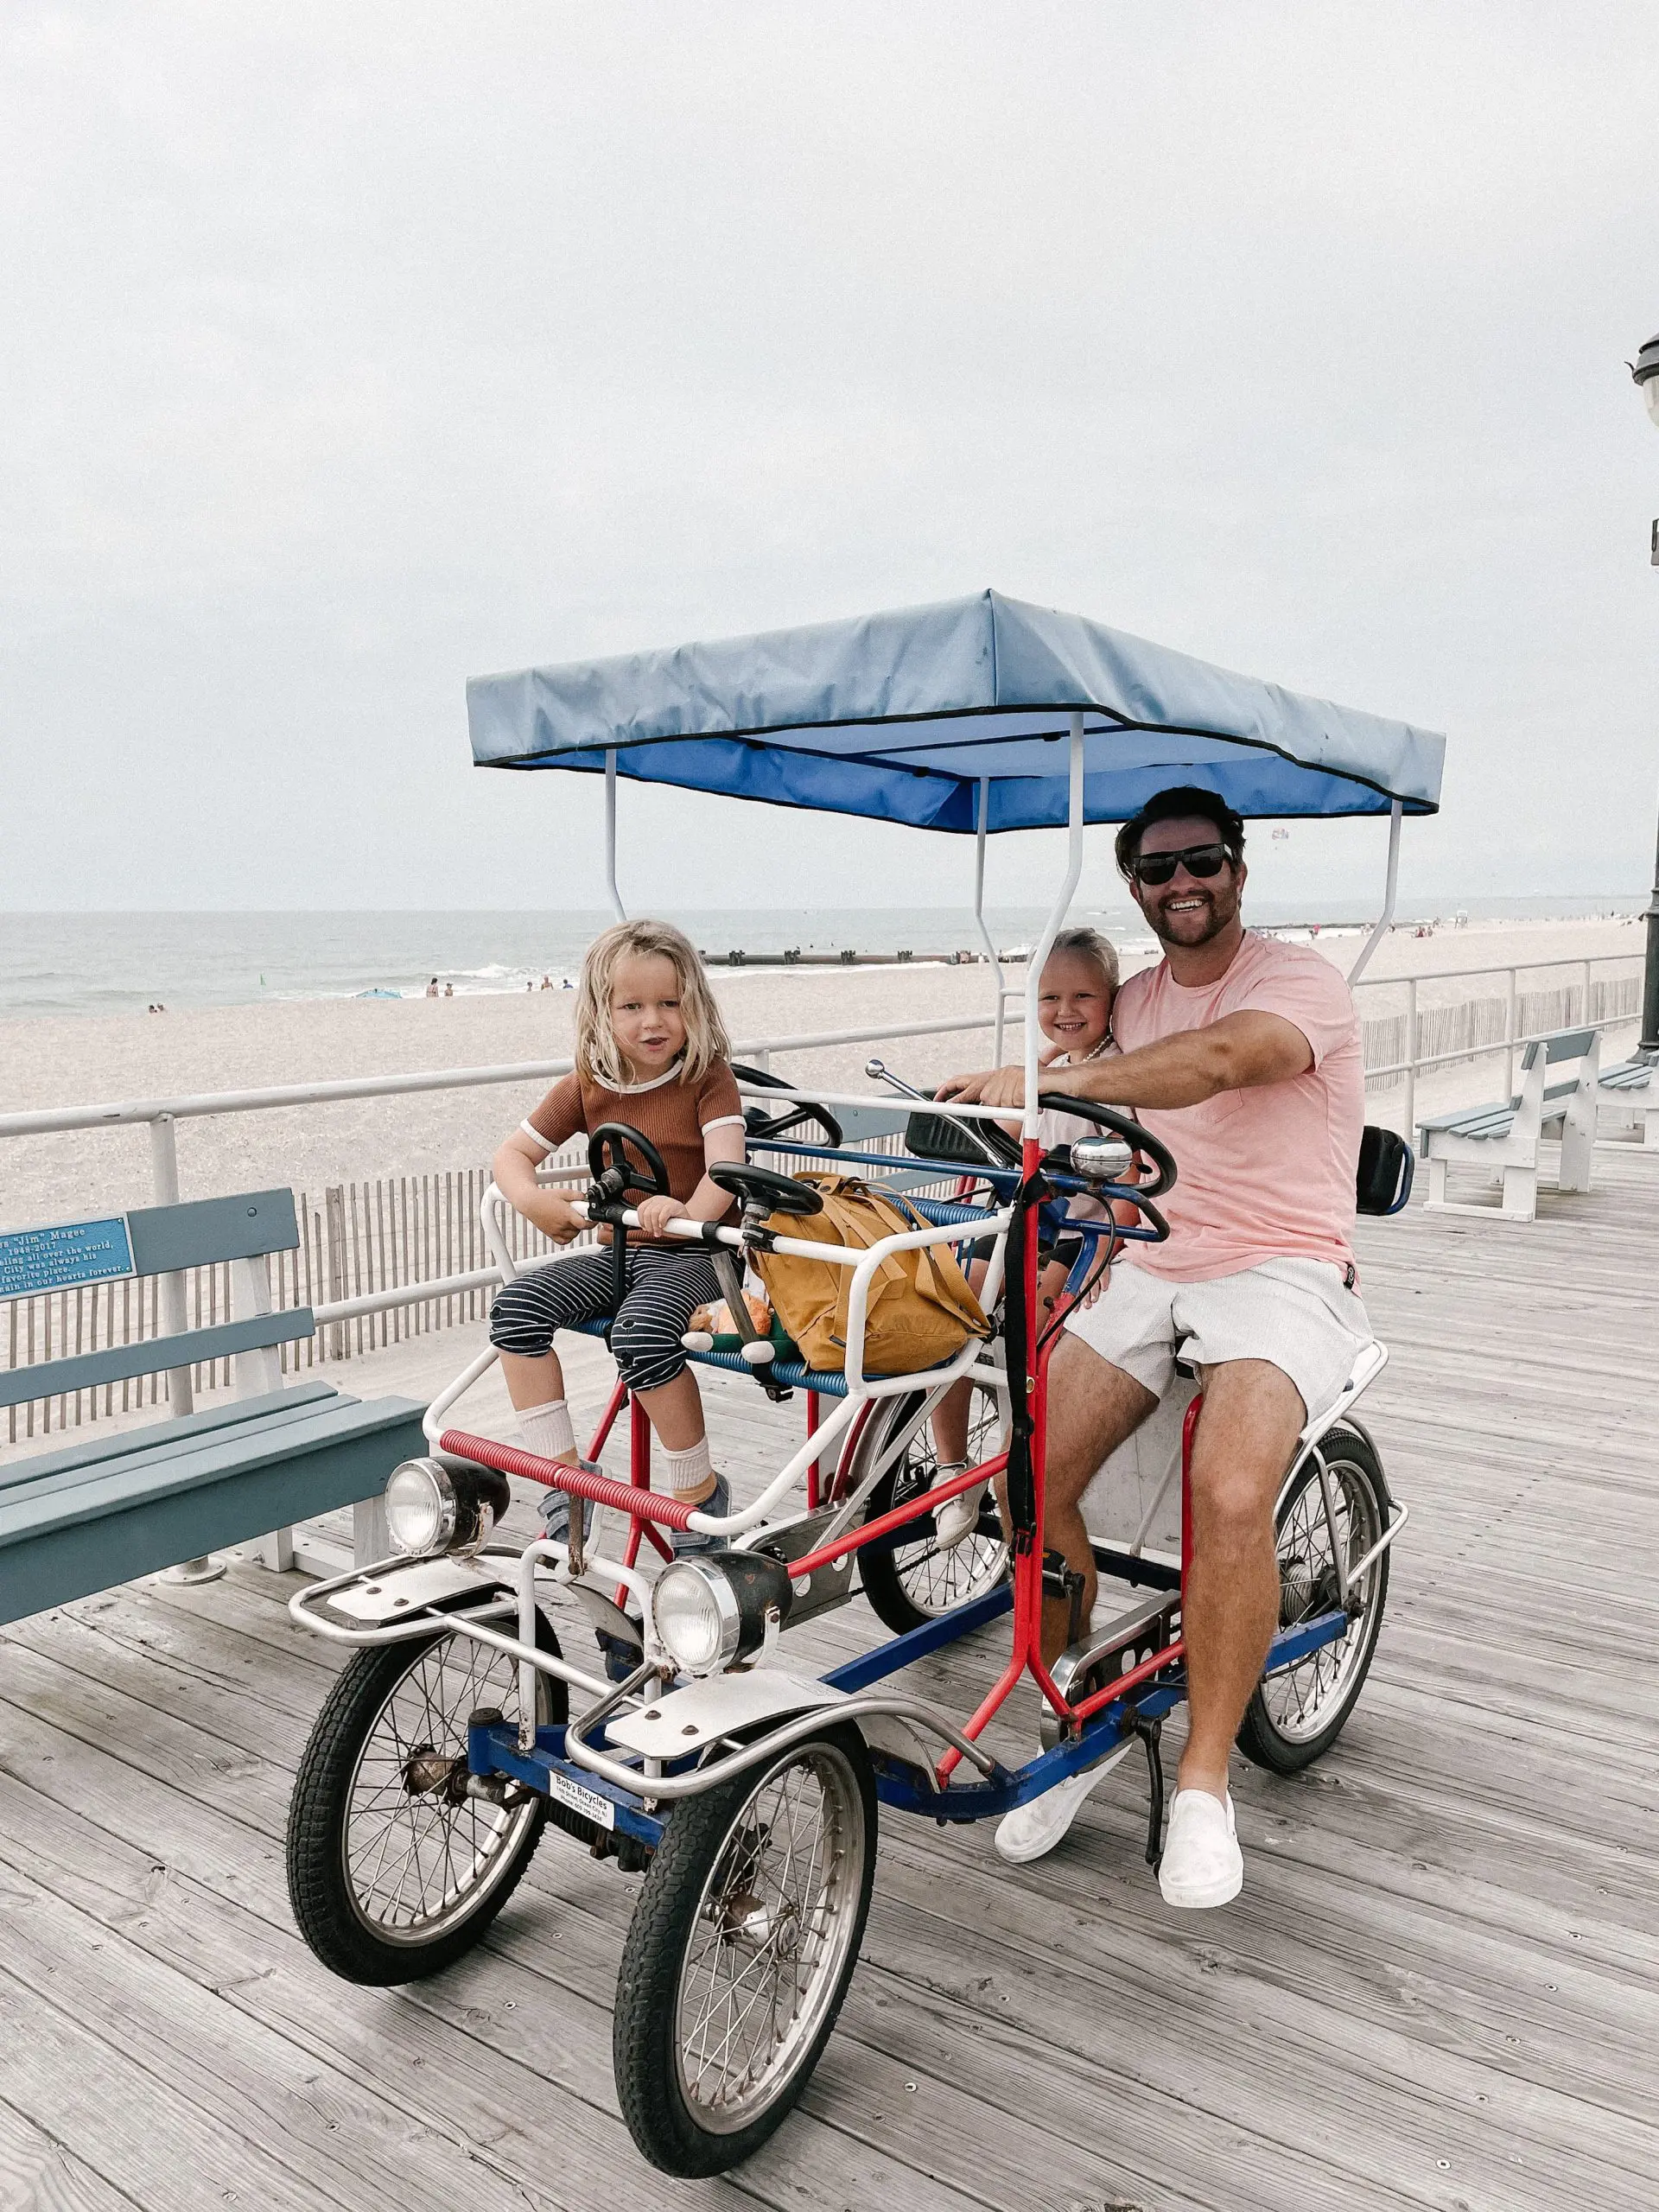 Long Branch Has Reclaimed Its Place As A Top Jersey Shore